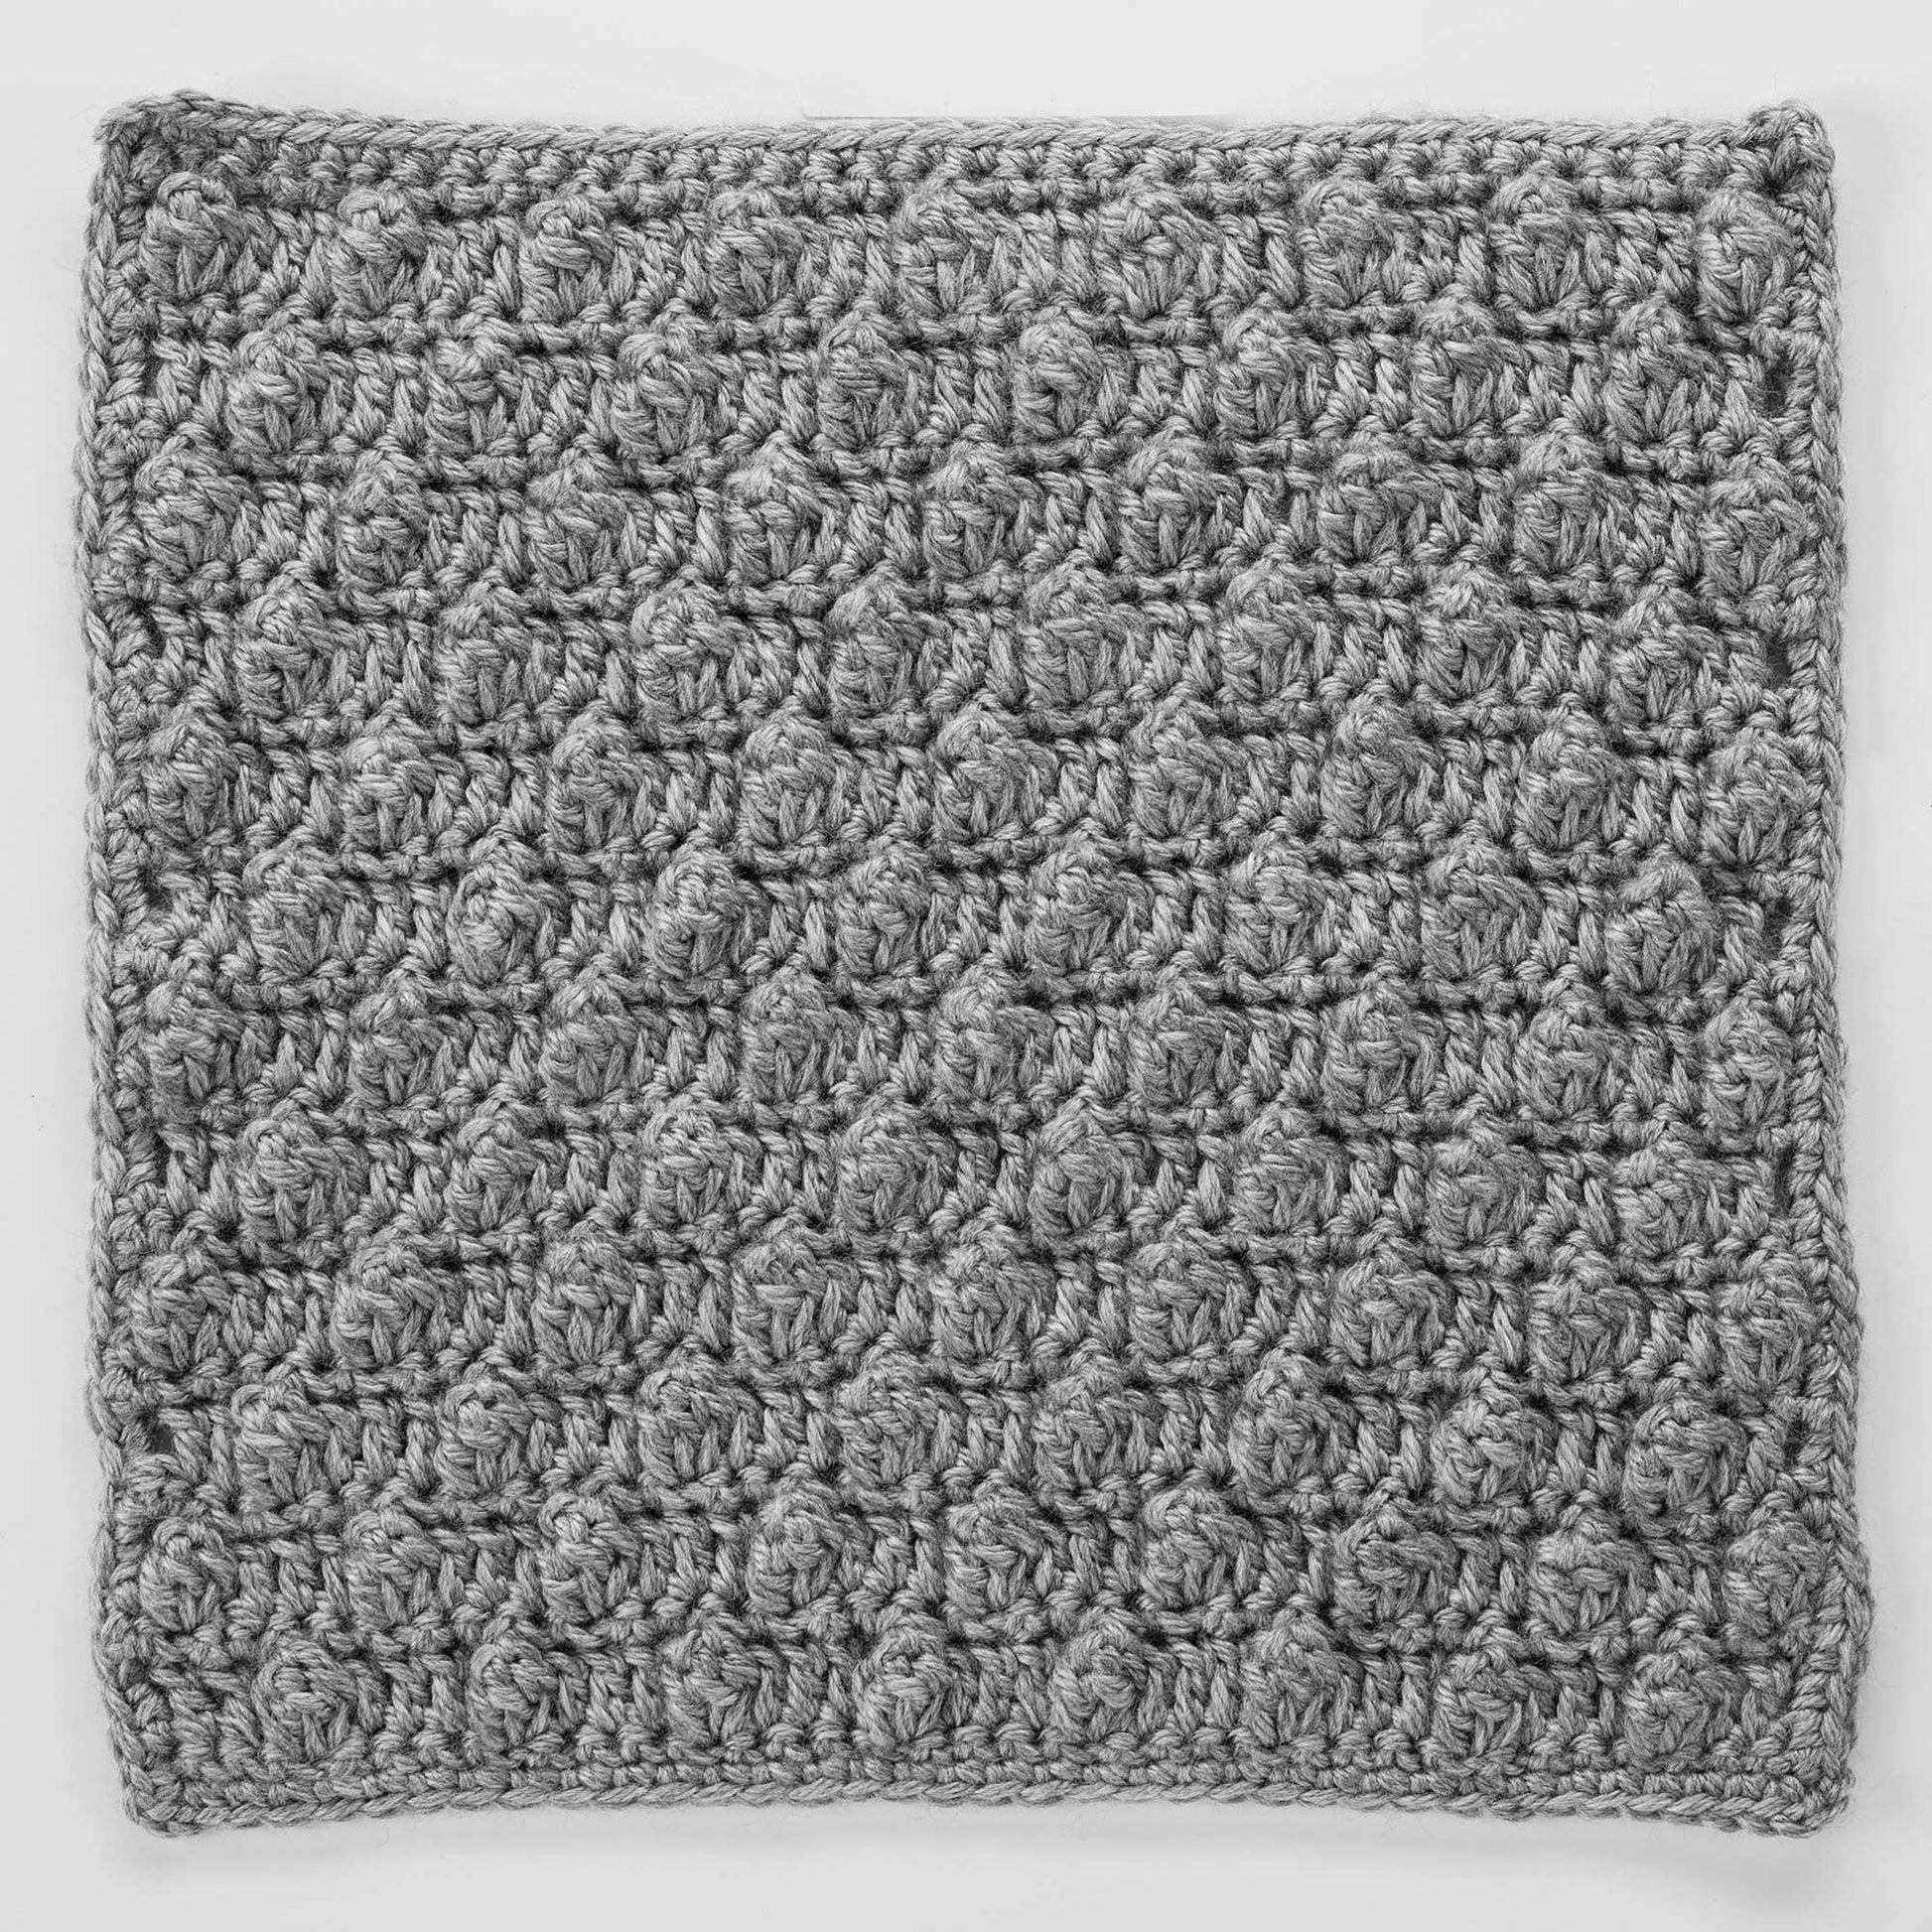 Free Red Heart Crochet Popcorn Square For Checkerboard Textures Throw Pattern